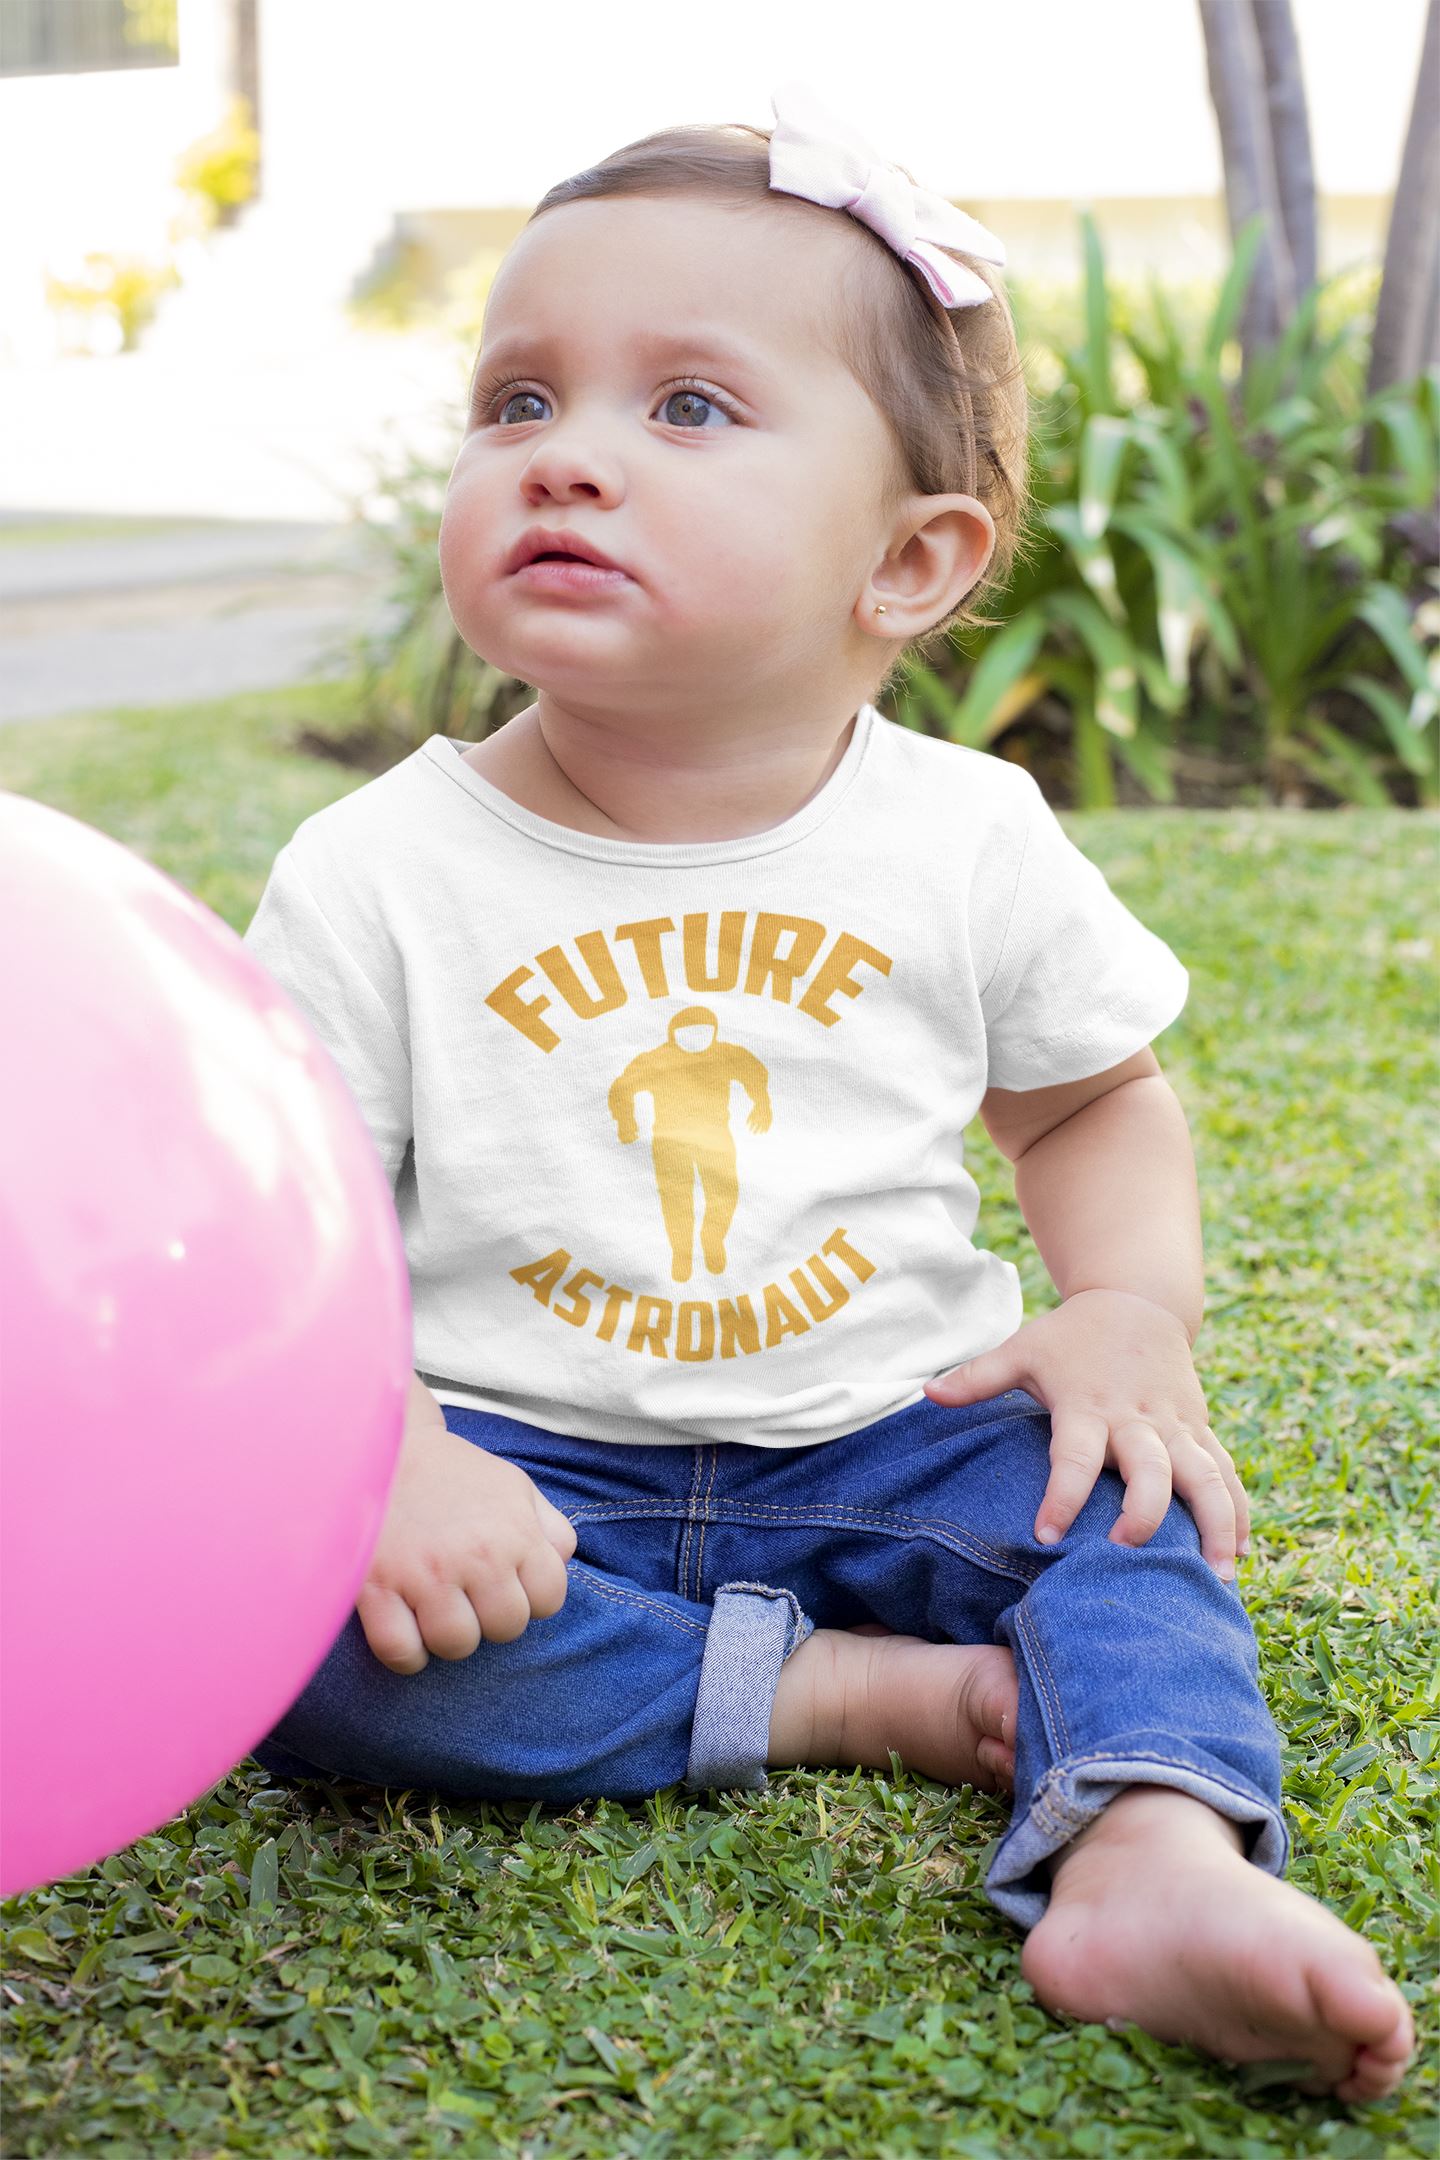 Future Astronaut Special White and Maroon T Shirt for Babies freeshipping - Catch My Drift India